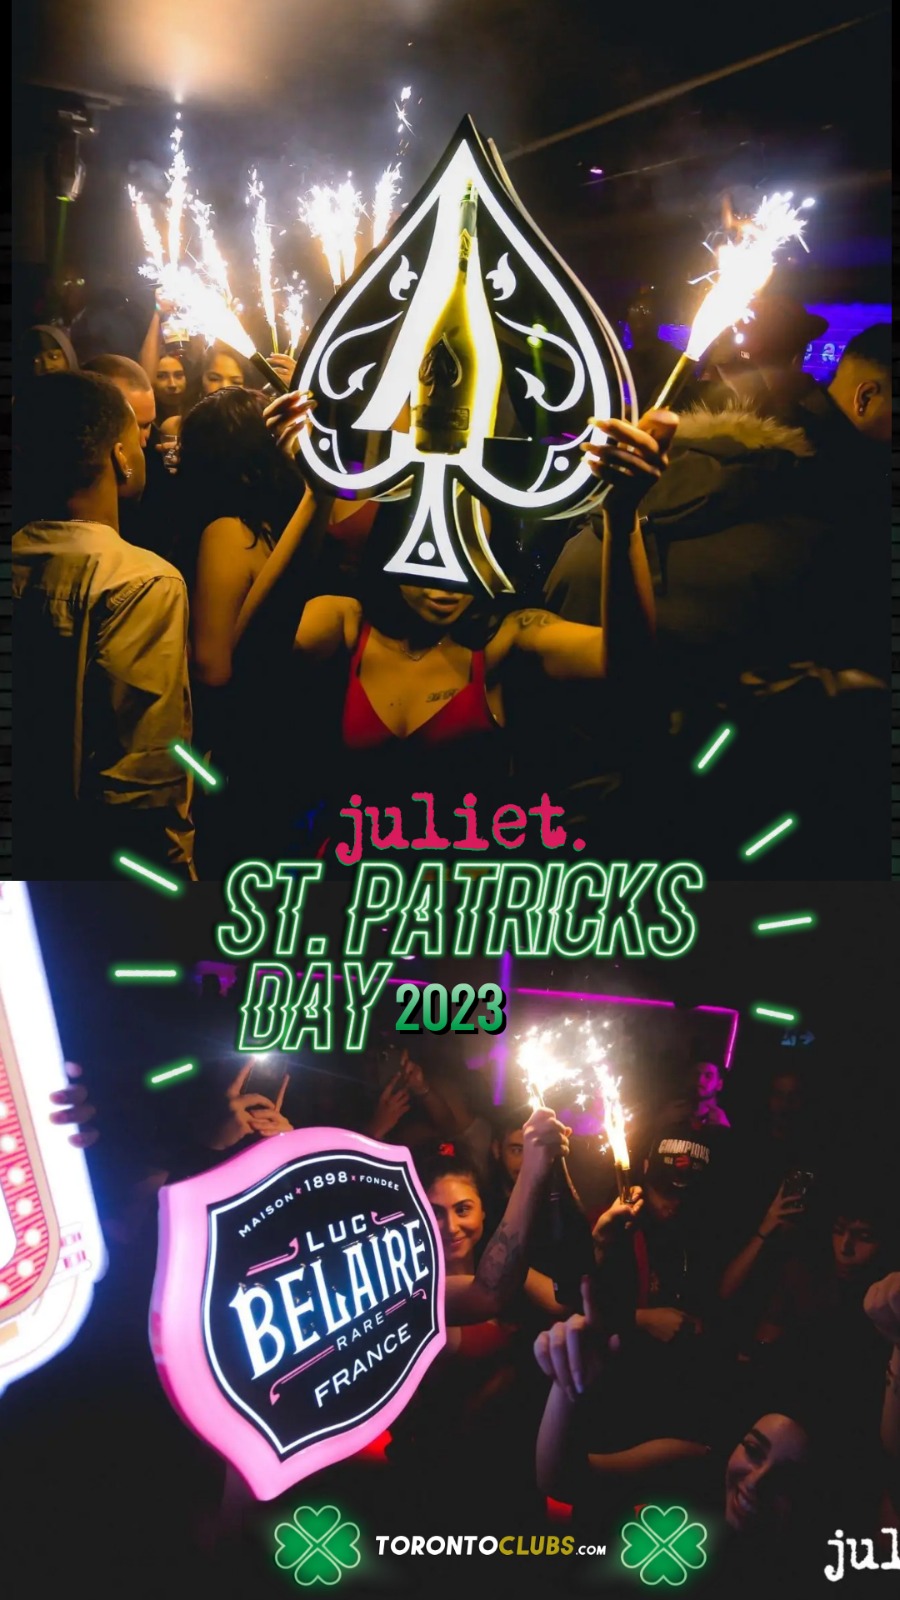 ST. PATRICK'S DAY 2023 EVENT & PARTY AT CALL HER JULIET TORONTO